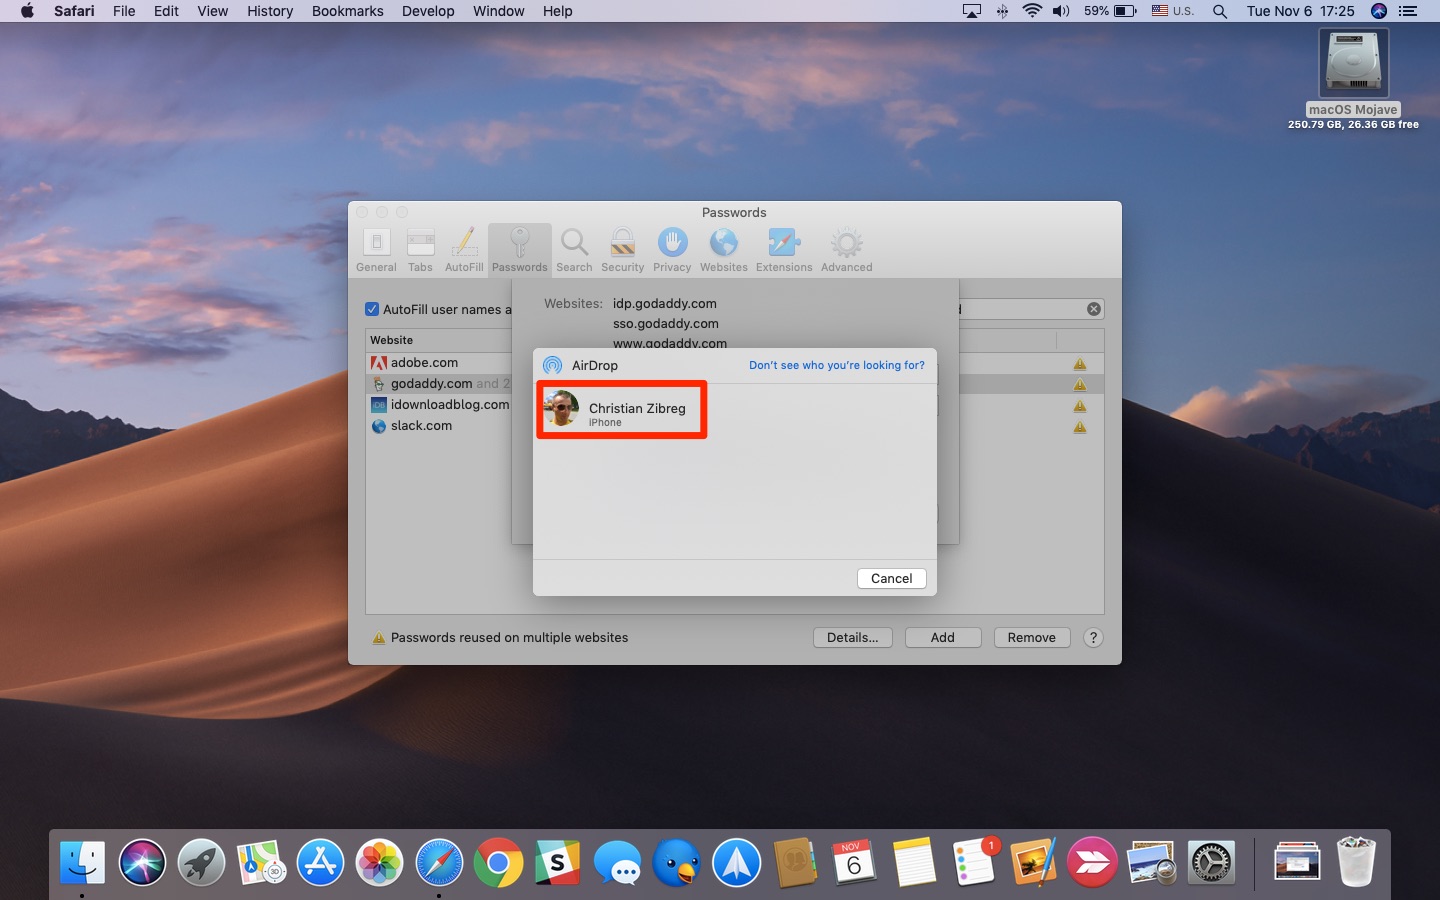 macOS_Mojave_AirDrop_saved_passwords_009